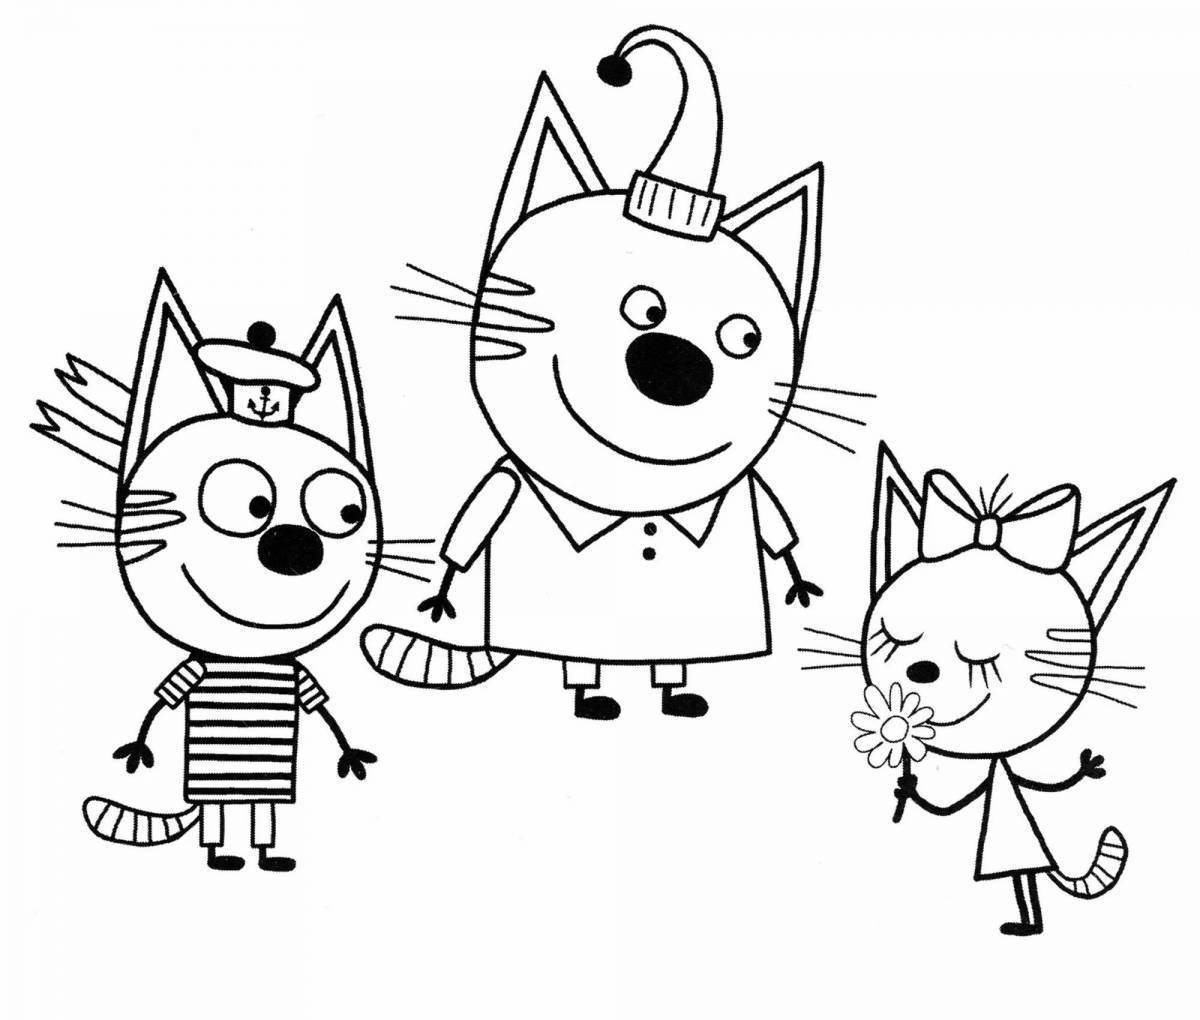 Turn on coloring 3 cats #7